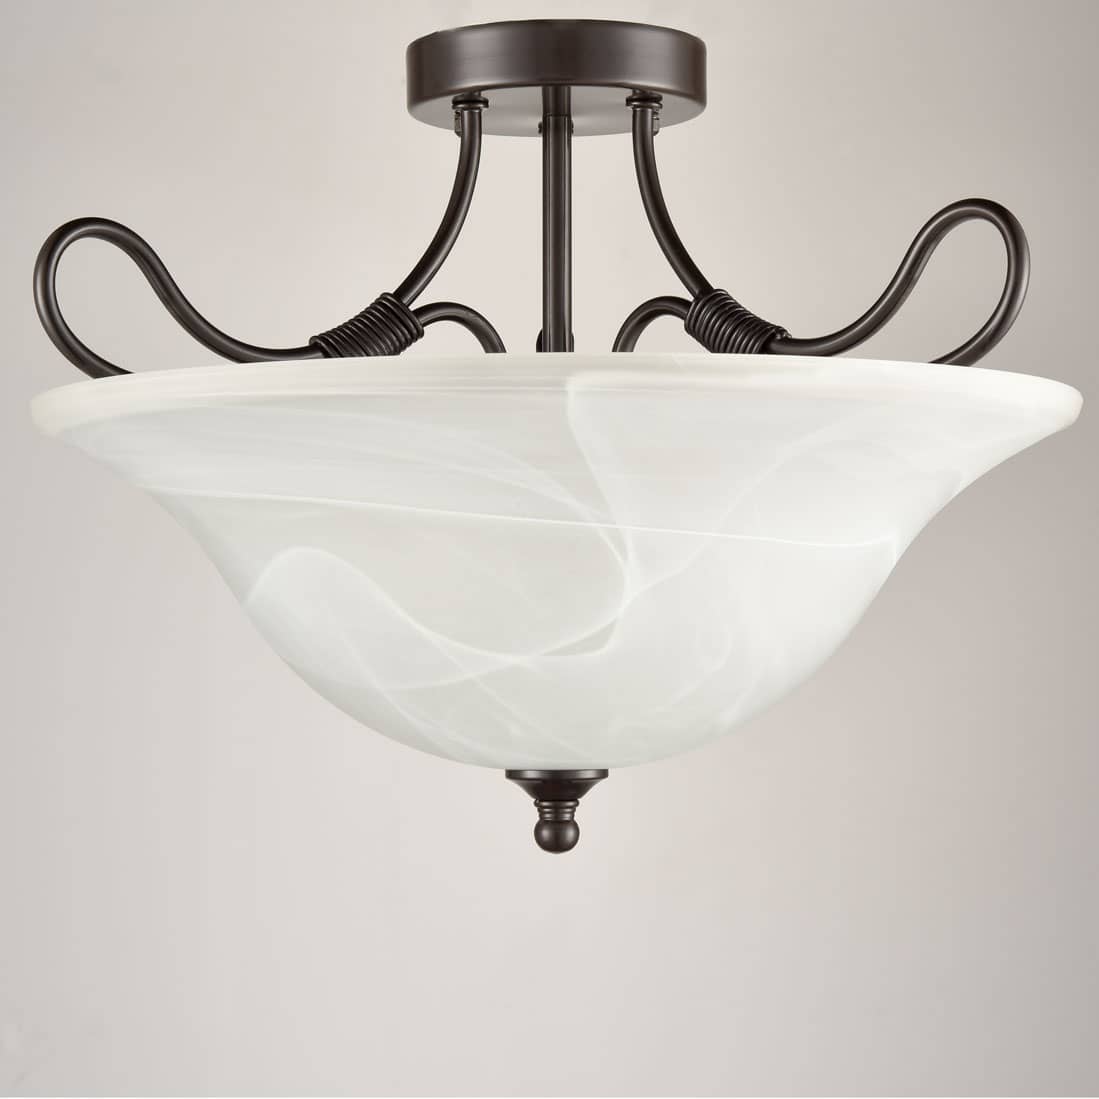 3-Light Transitional Ceiling Light ORB with White Frosted Alabaster Glass